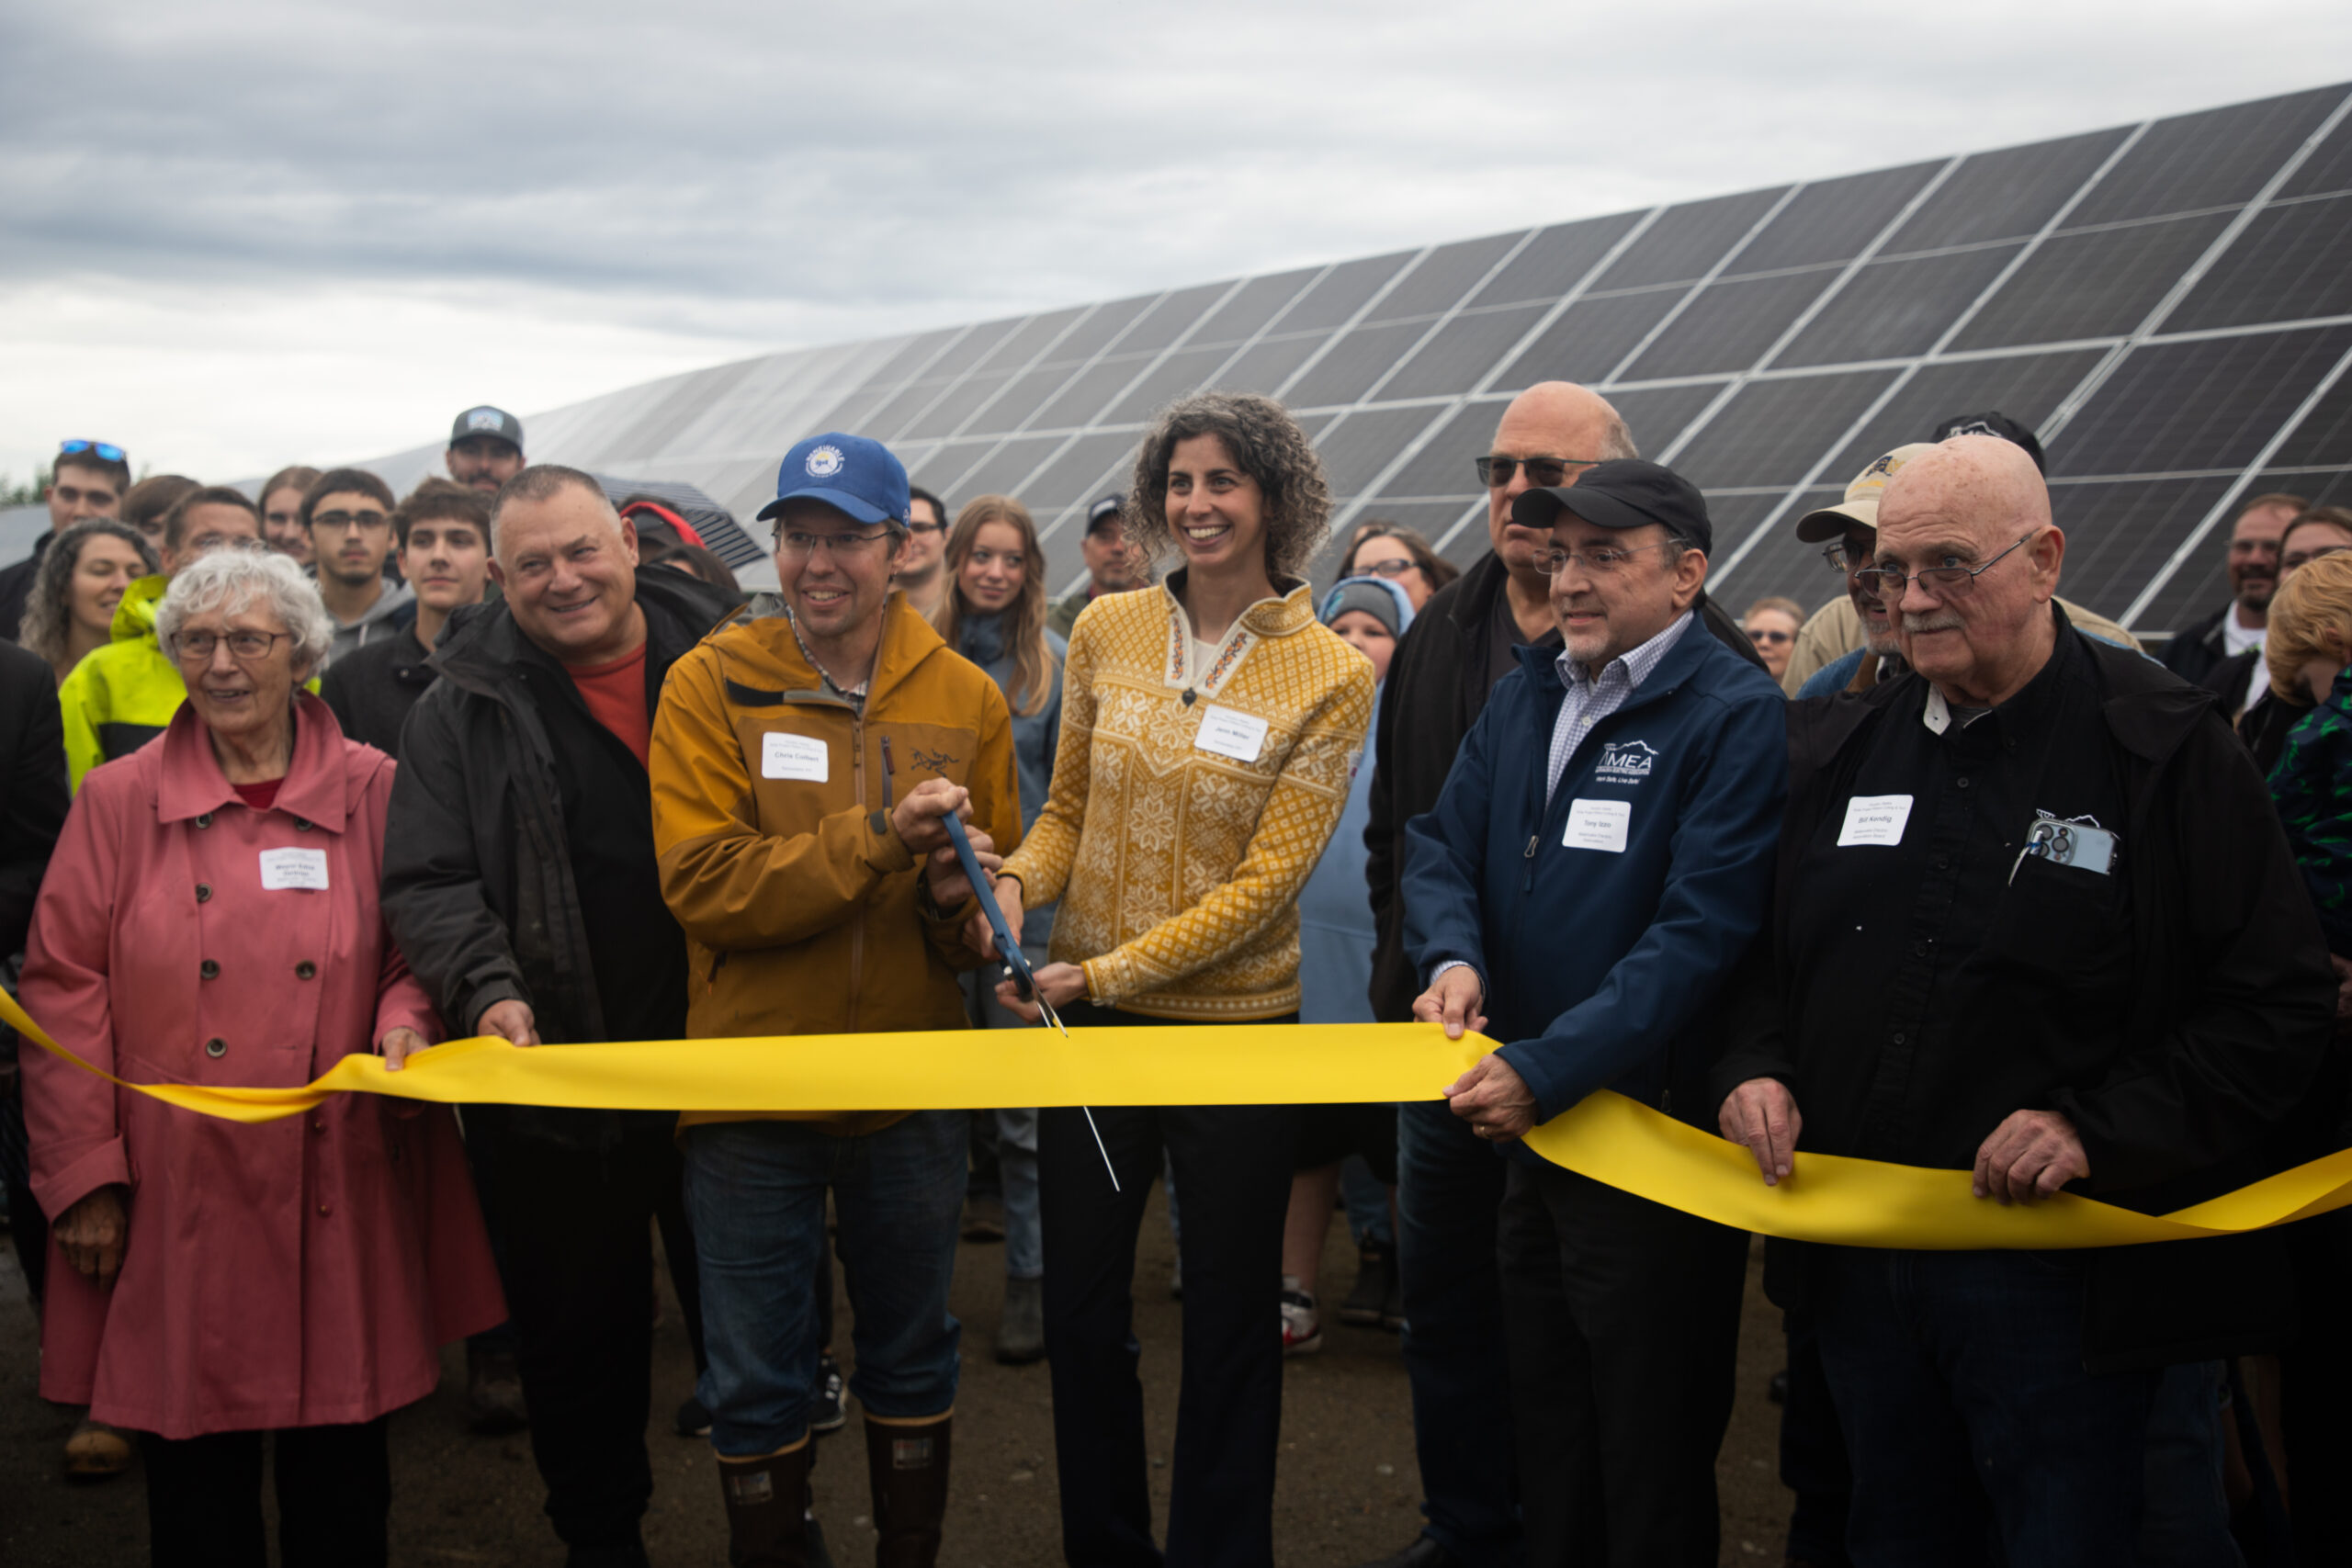 A crowd of people gather in front of solar panels as those in the front hold a yellow ribbon that is about to be cut by two people holding large scissors.